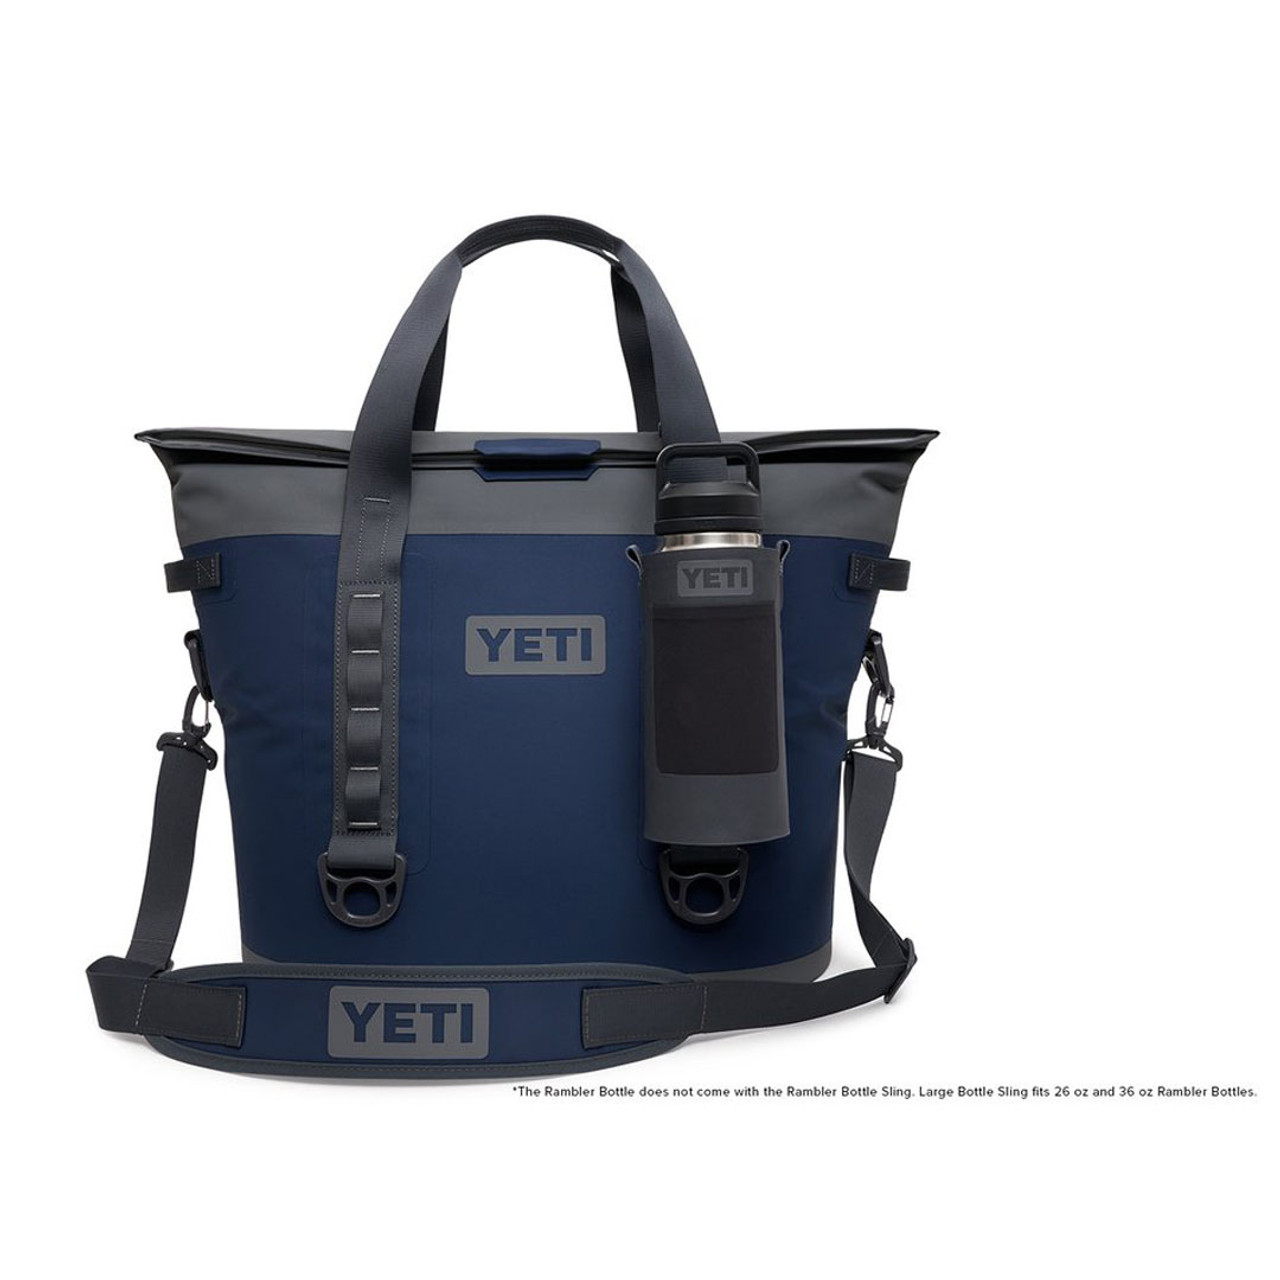 https://cdn11.bigcommerce.com/s-ppsyskcavg/images/stencil/1280x1280/products/40381/129079/191403-Bottle-Sling-Charcoal-M30-Navy-Front-Handles-Up-with-Bottle-Sling-1680x1024-EmbeddedText__53594.1597421515.jpg?c=2?imbypass=on